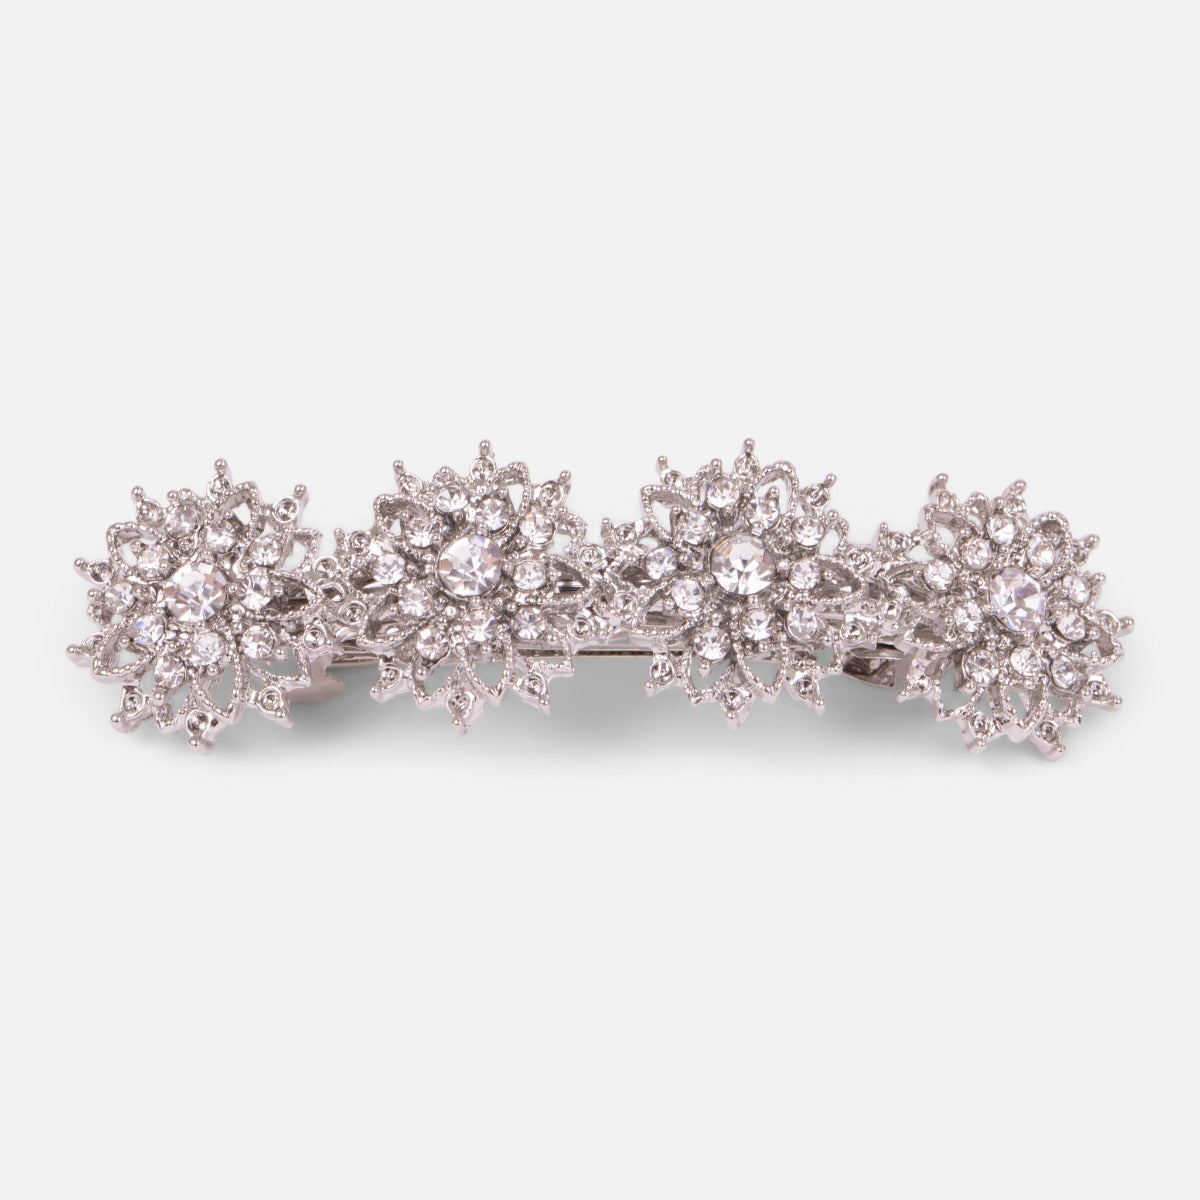 Silvered barrette with 4 floral ornaments